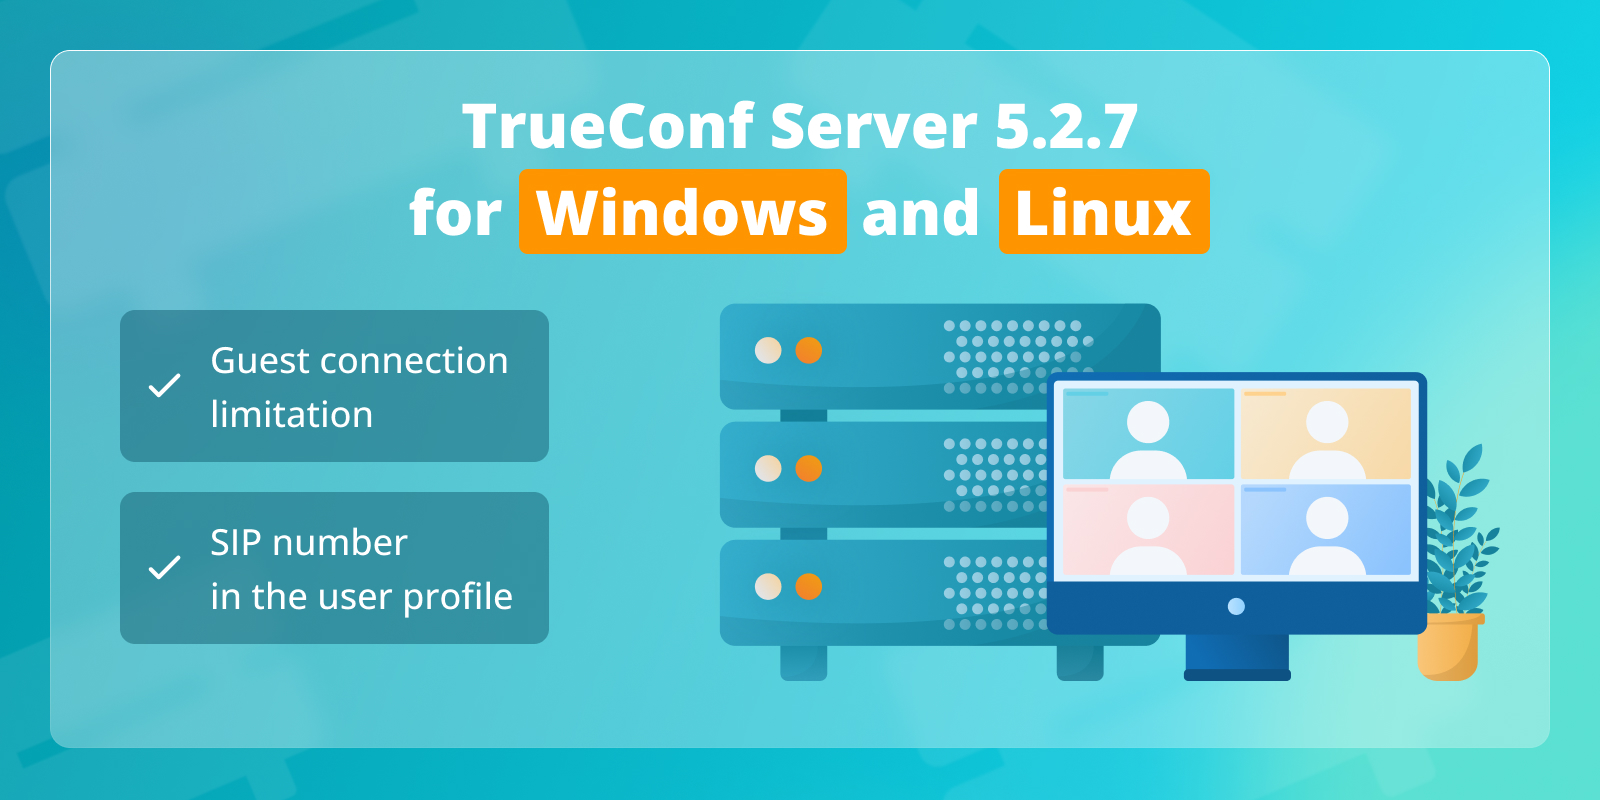 TrueConf Server 5.2.7: Custom limits on guest connections and SIP number in the user profile 1